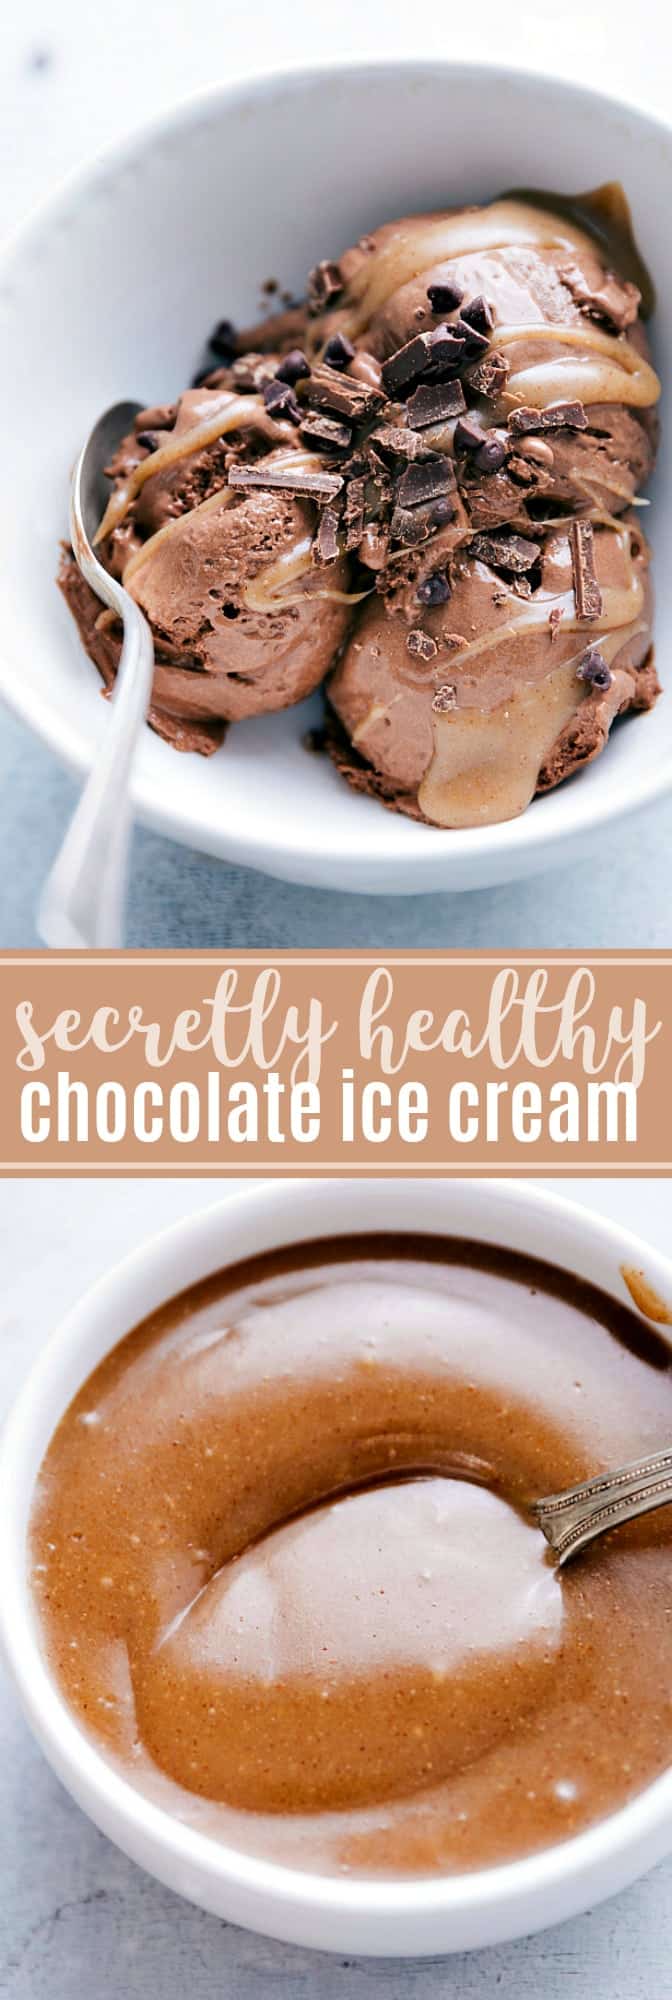 Delicious chocolate ice cream made with better-for-you ingredients, packed with protein, and drizzled in a delicious caramel sauce. via chelseasmessyapron.com #healthy #chocolate #ice #cream #dessert #easy #quick #caramel #sauce #secret #ingredients #protein #health #kidfriendly